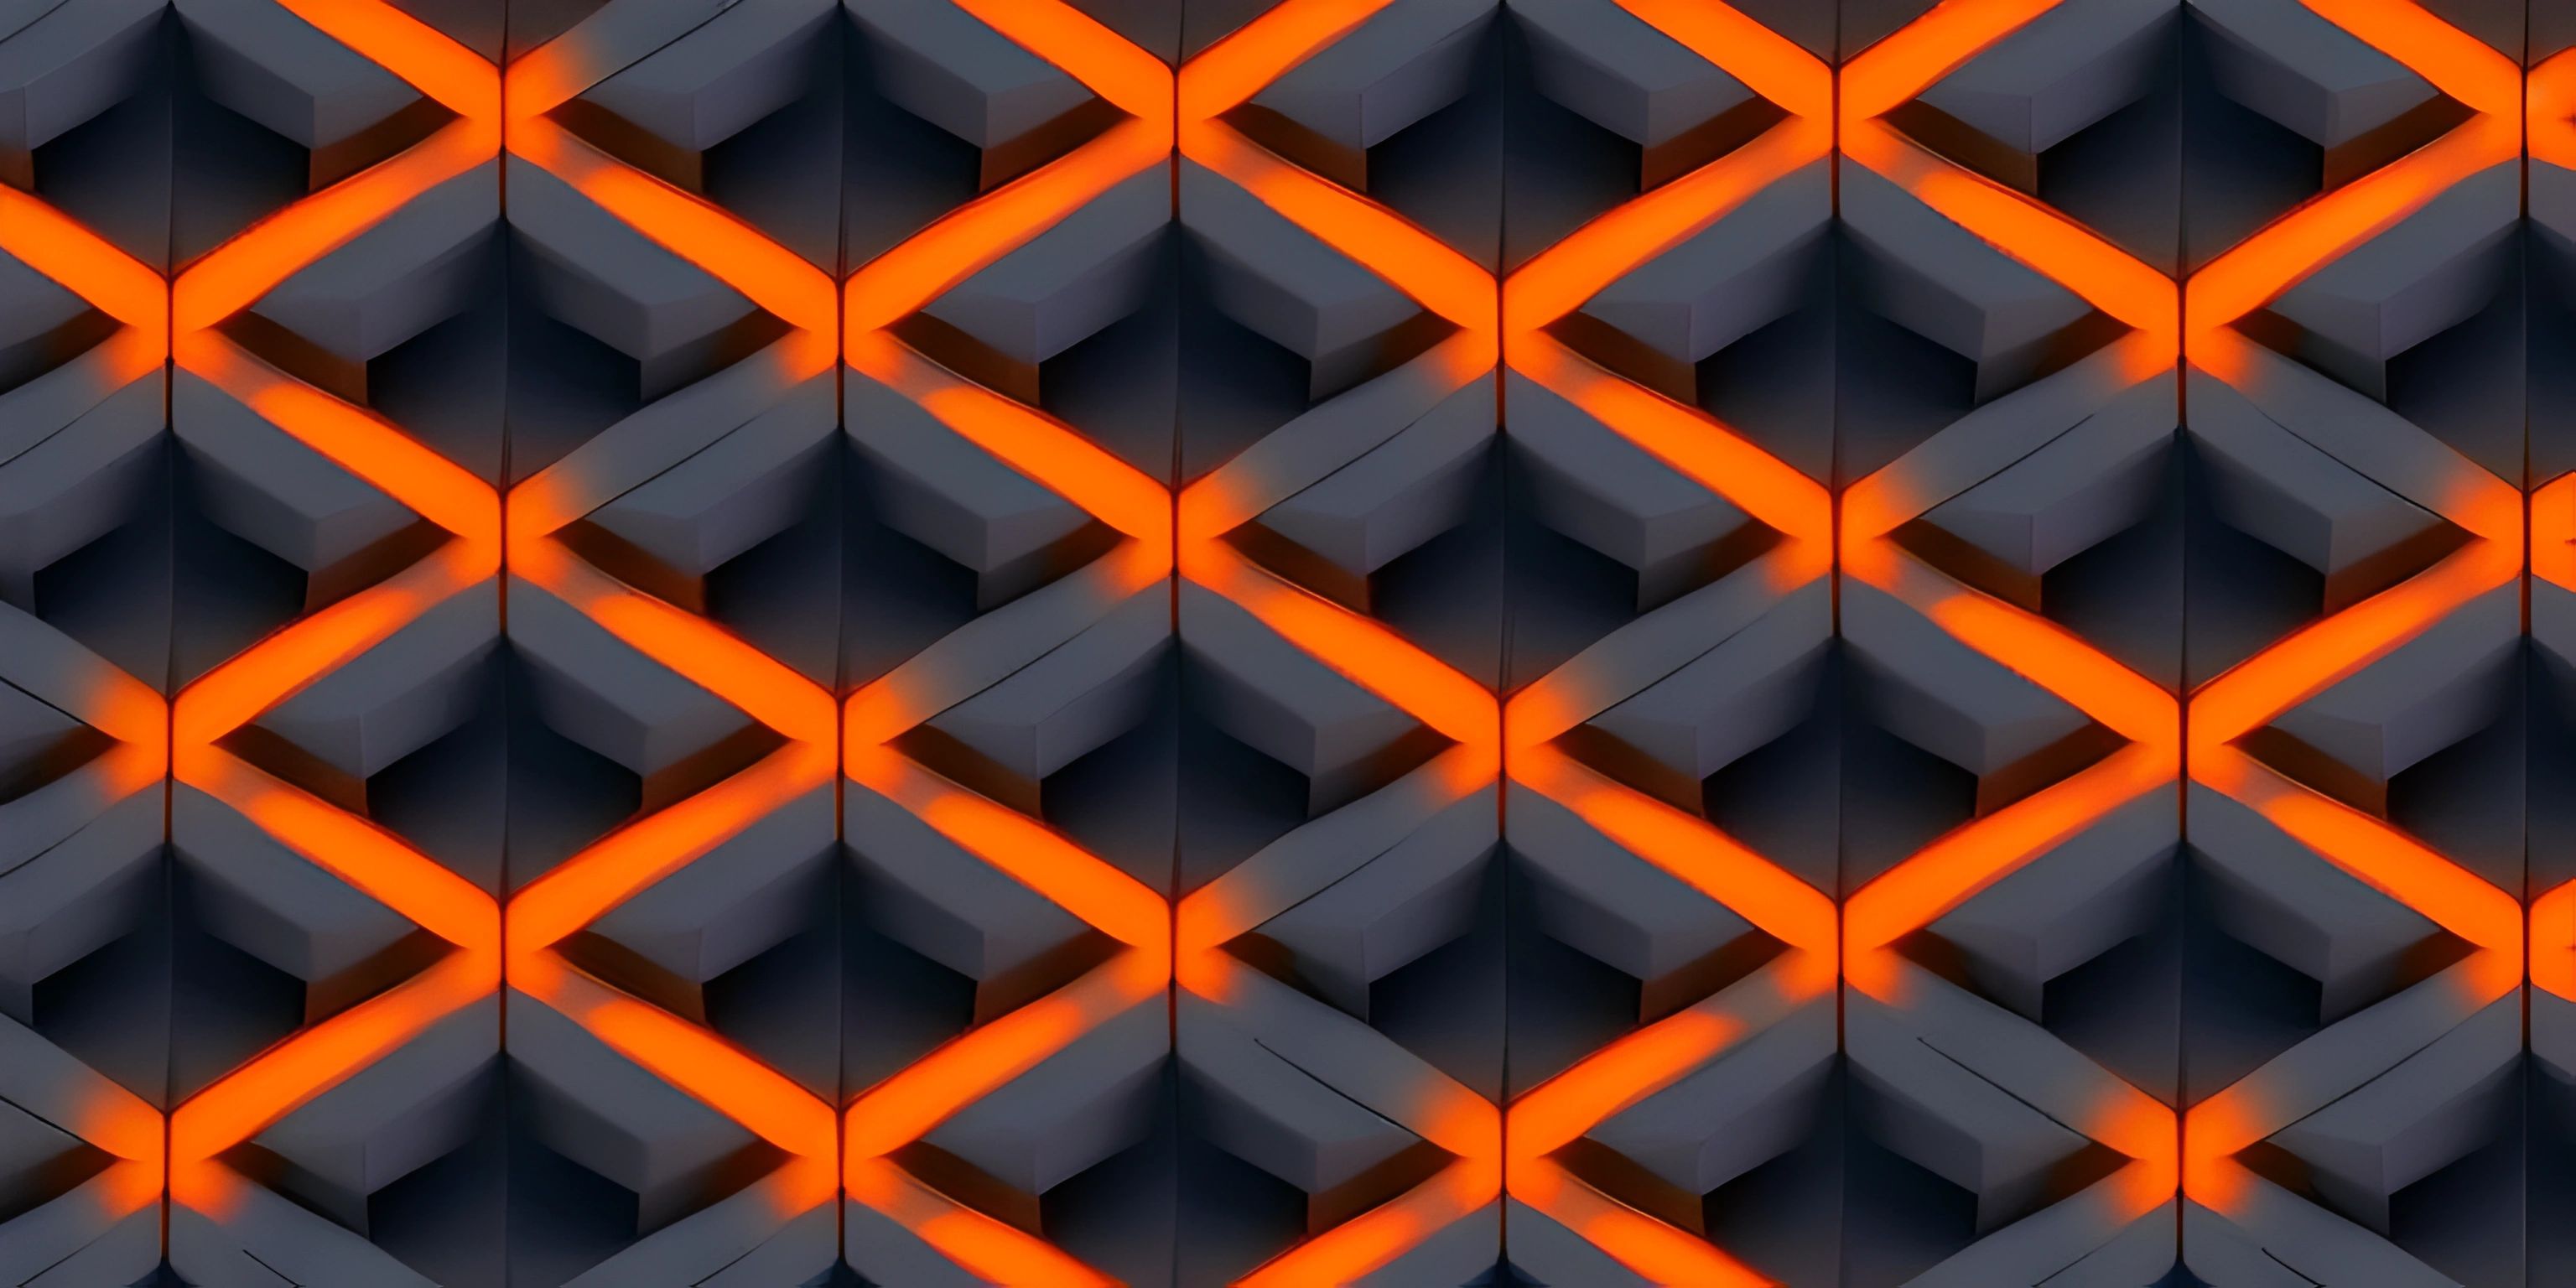 an orange and black abstract pattern background with squares on the edges and diagonals in rows